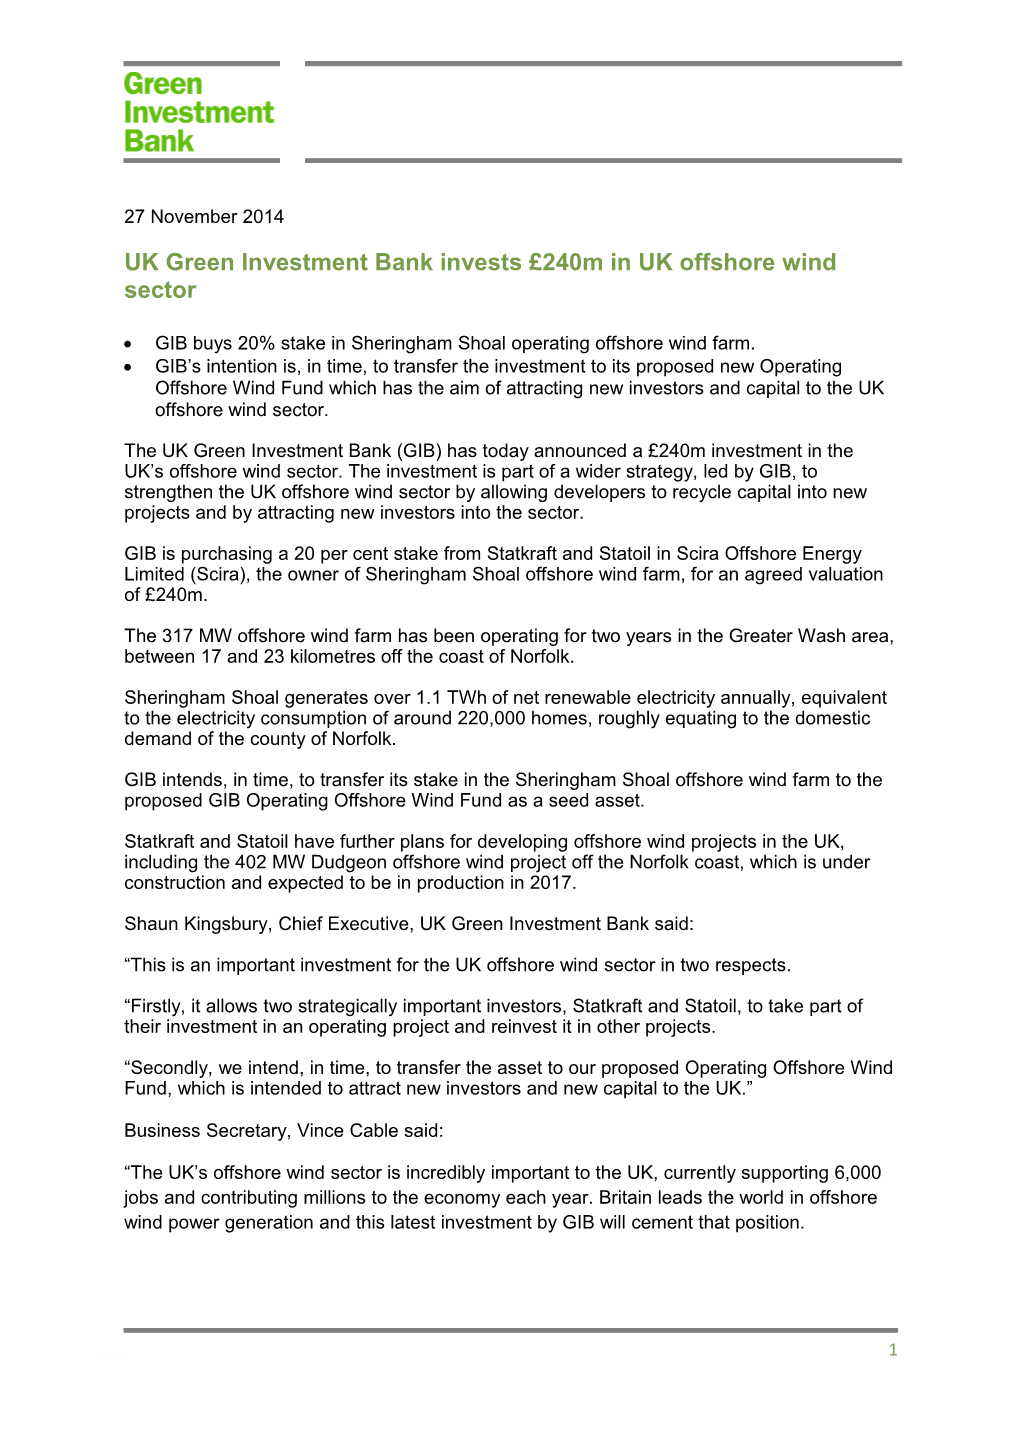 UK Green Investment Bank Invests 240M in UK Offshore Wind Sector